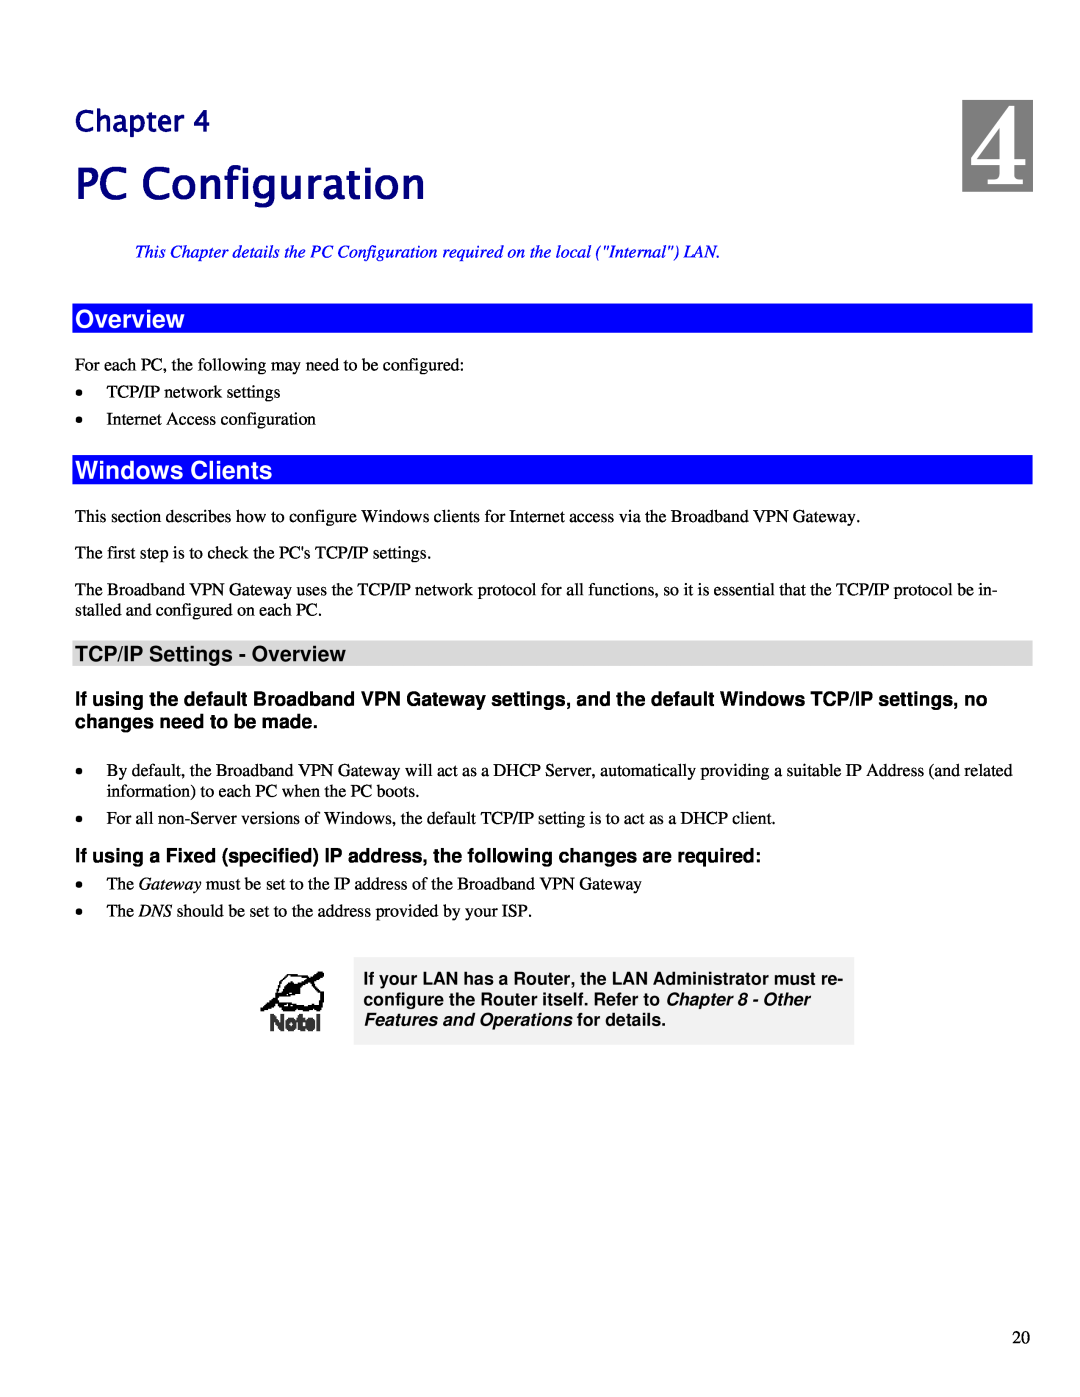 TRENDnet TW100-BRV324 manual PC Configuration, Windows Clients, TCP/IP Settings - Overview, Chapter 